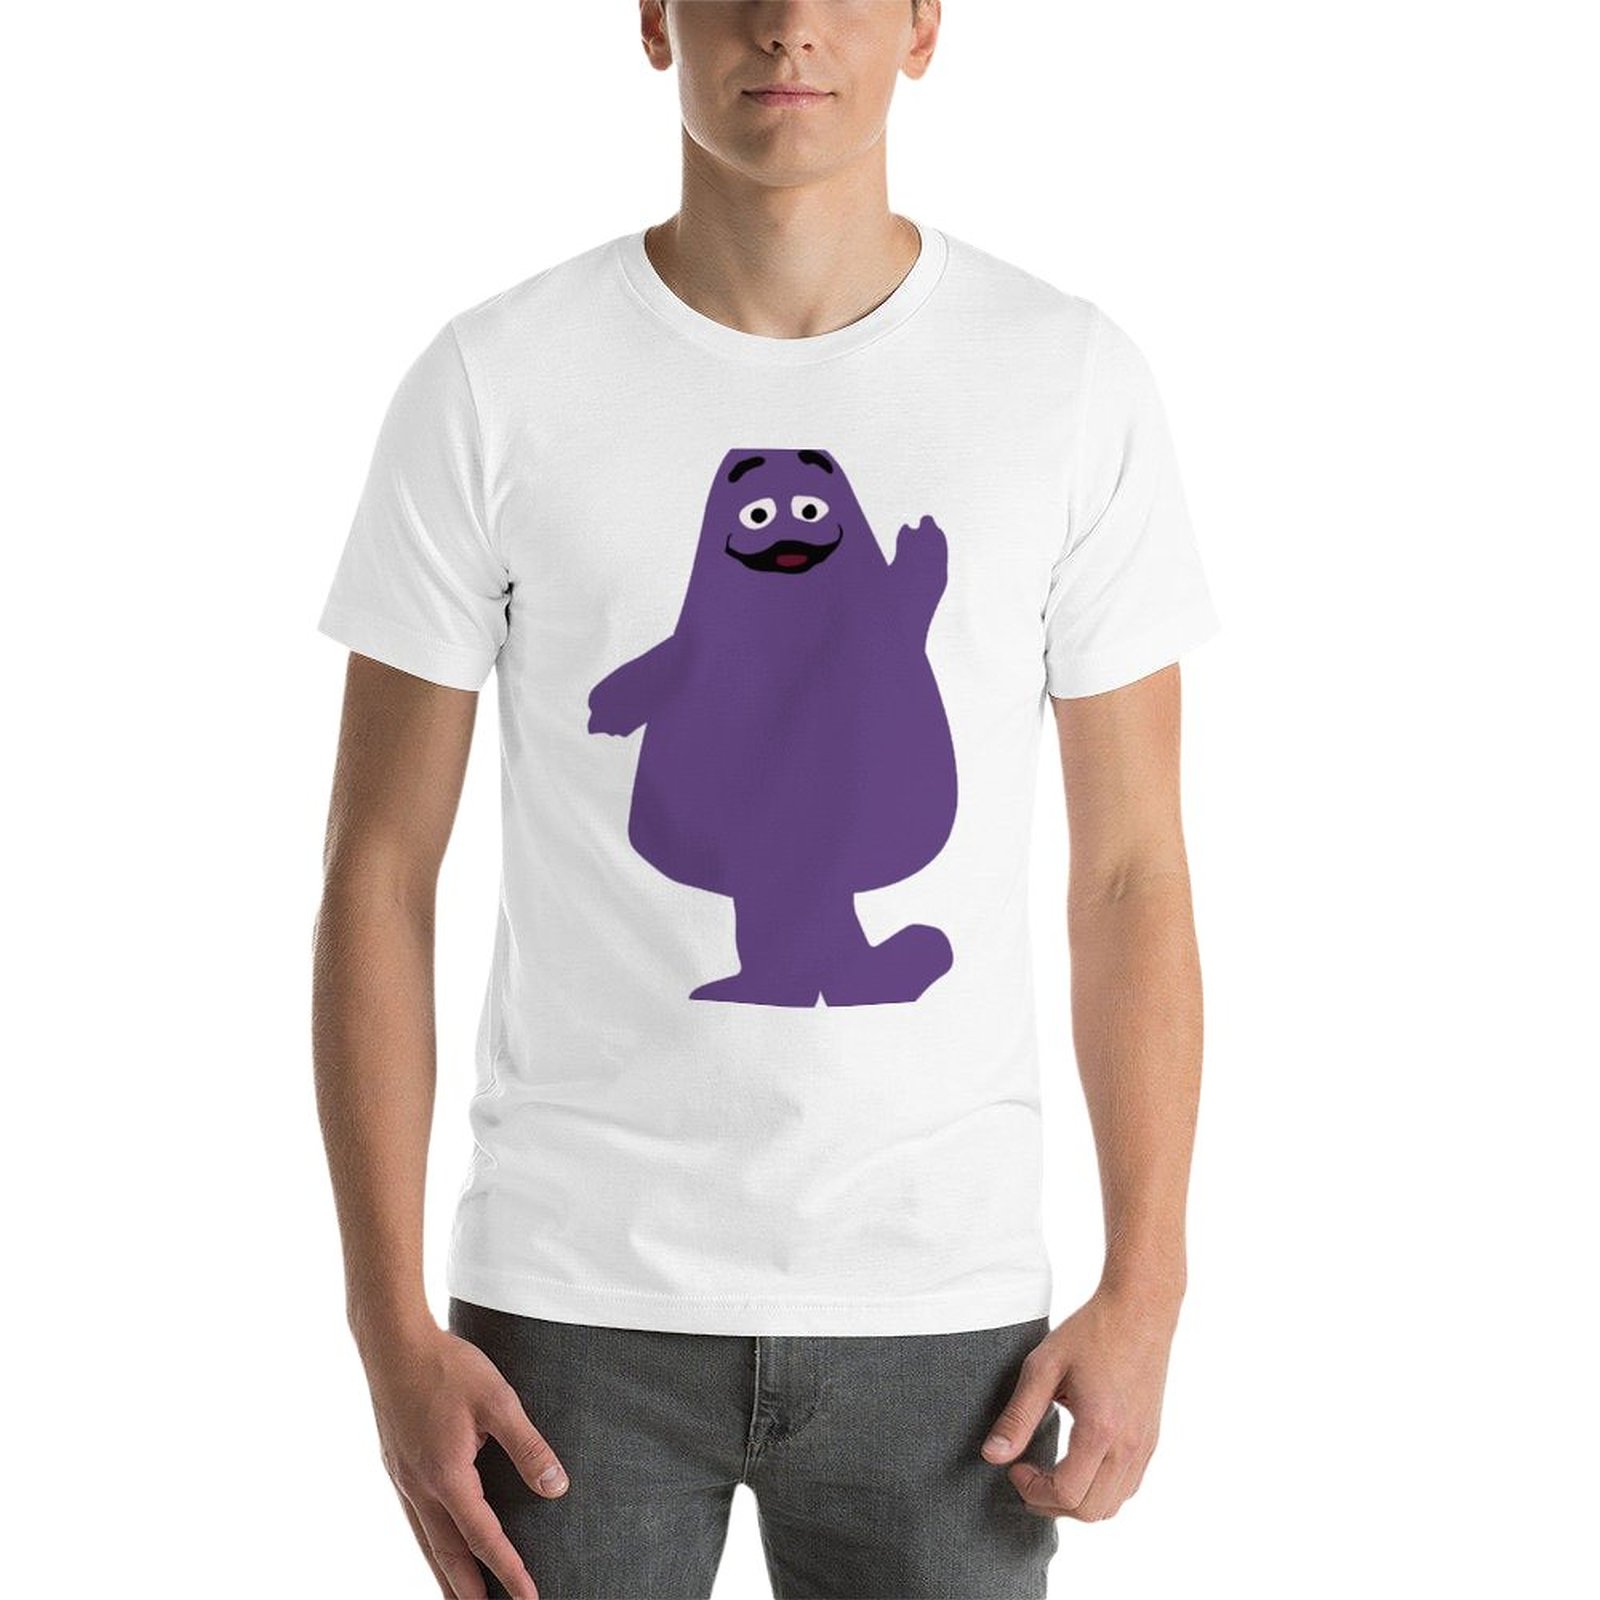 New Grimace T Shirt Tee shirt graphic t shirts boys white t shirts quick drying t 2 - Grimace Plush